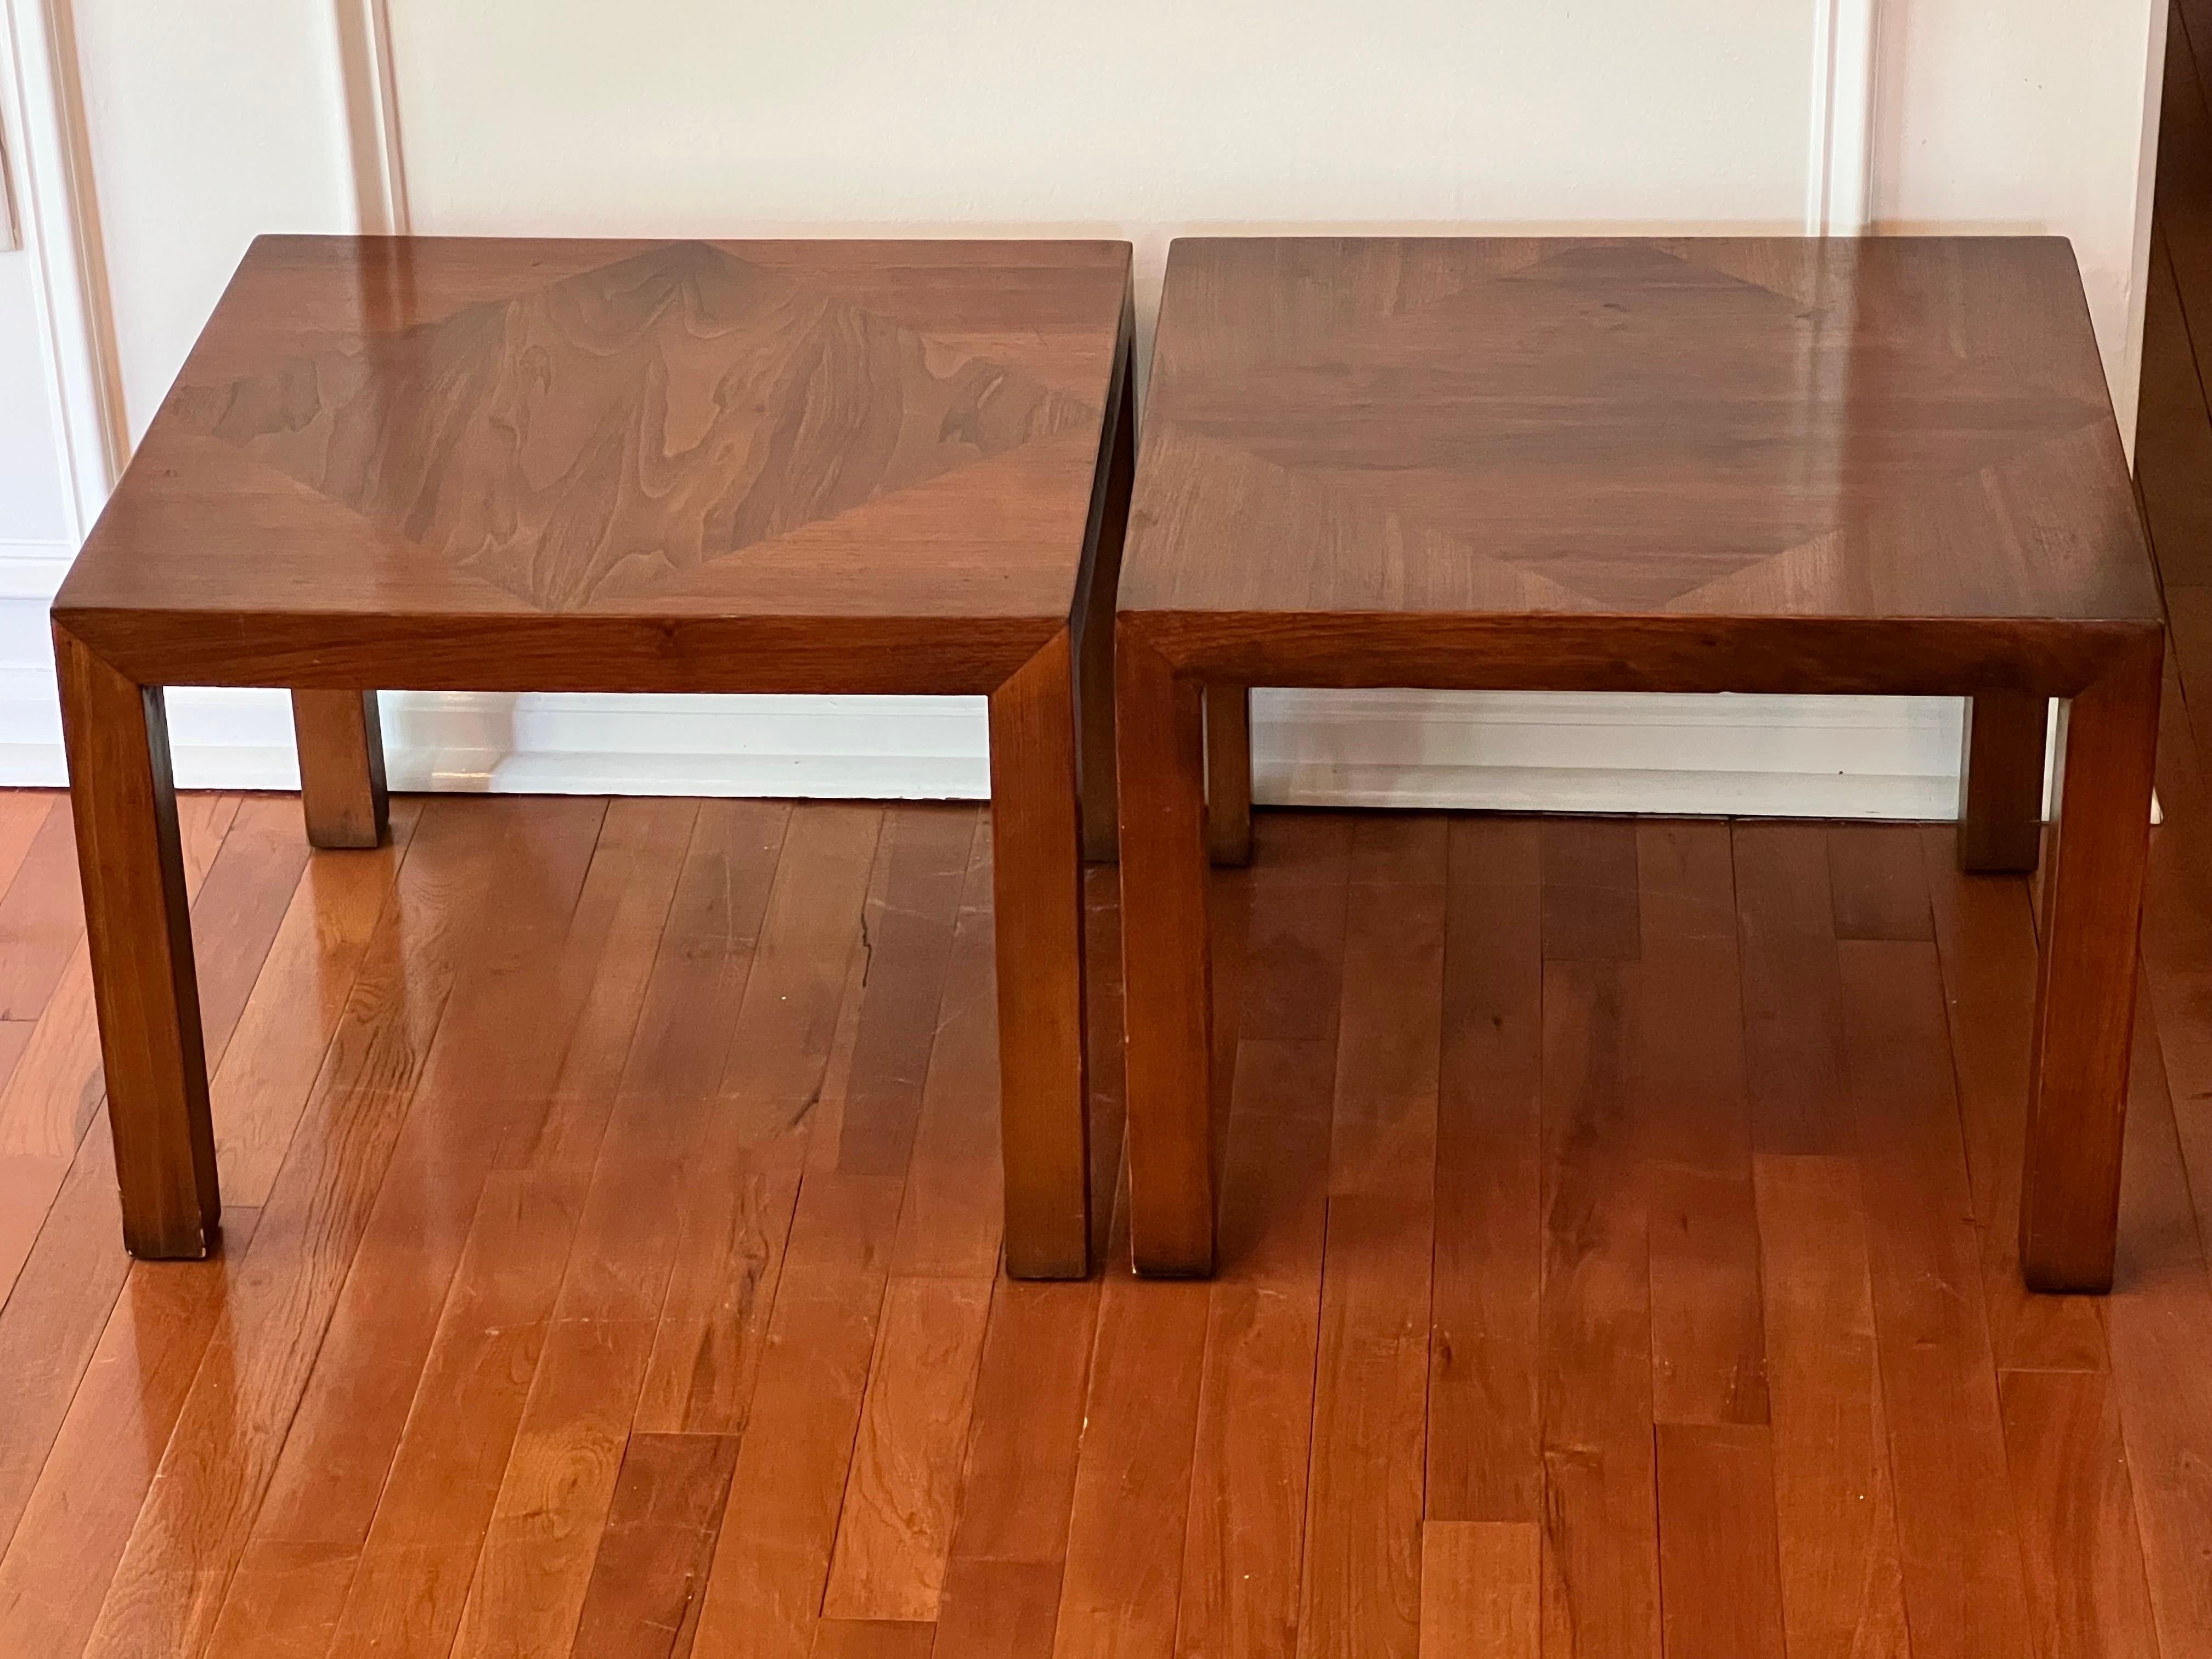 Gorgeous vintage Lane Parsons style stackable square end tables. The pair features a richly grained, contrasting walnut parquetry inlay with diamond motif. May be stacked, placed side by side as a unique coffee table or stand alone individually as